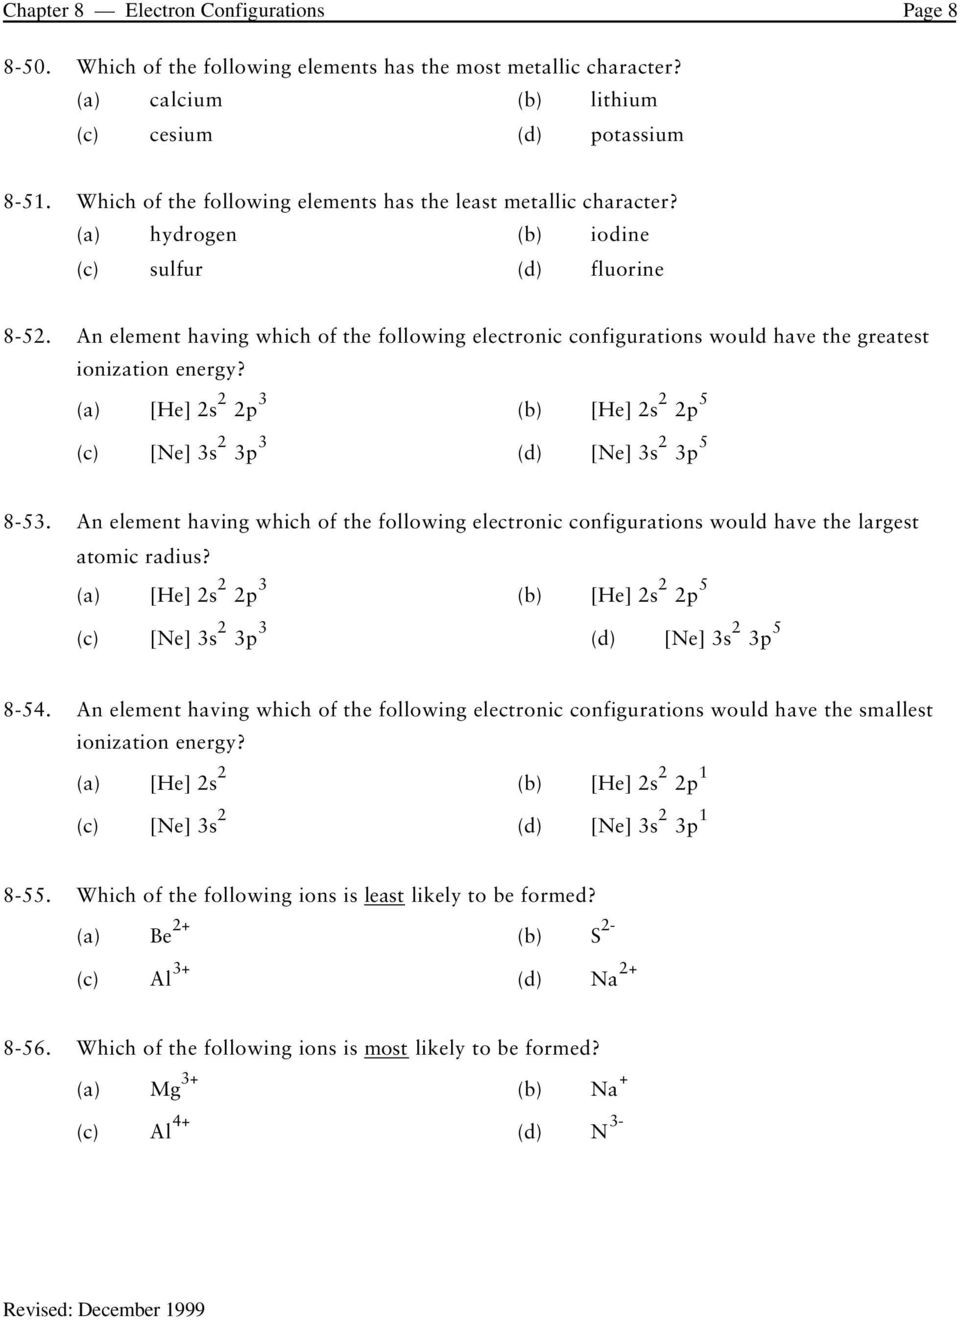 Electron Configuration Worksheet Answers Key Chapter 8 atomic Electronic Configurations and Periodicity